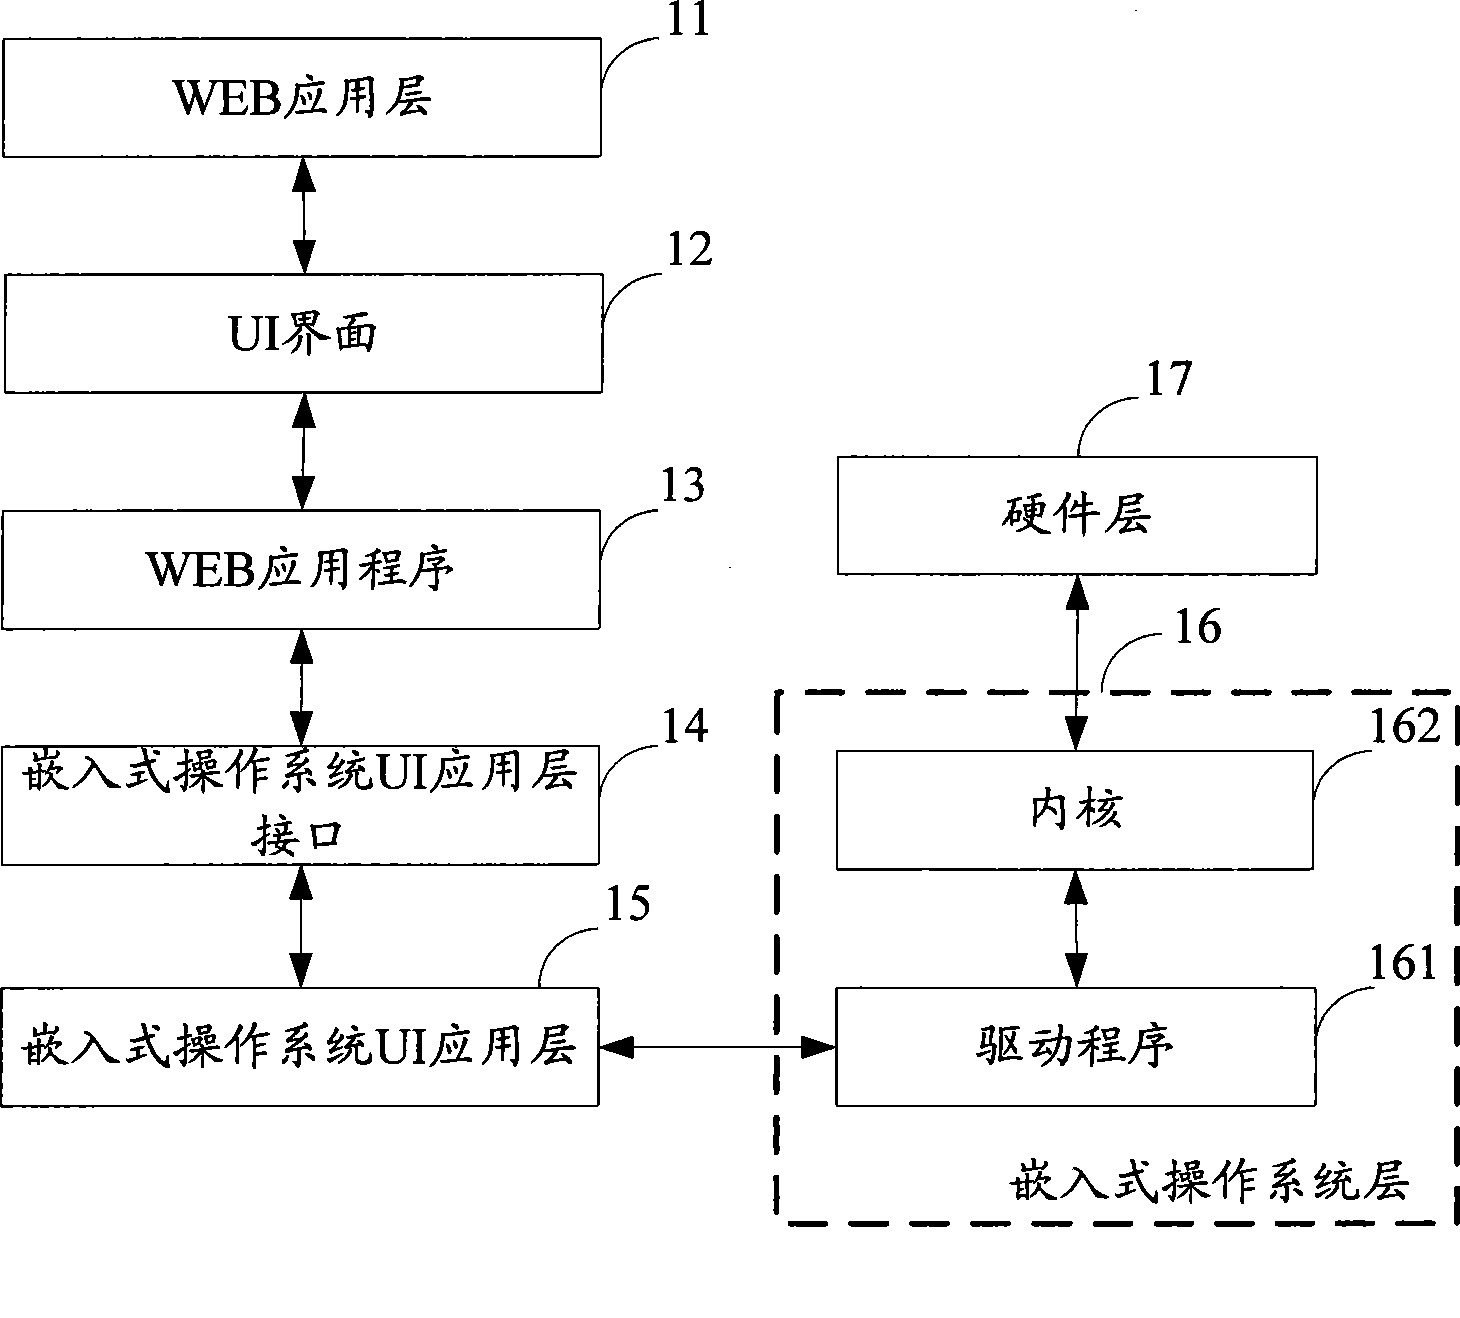 Generation system, method for television user interface